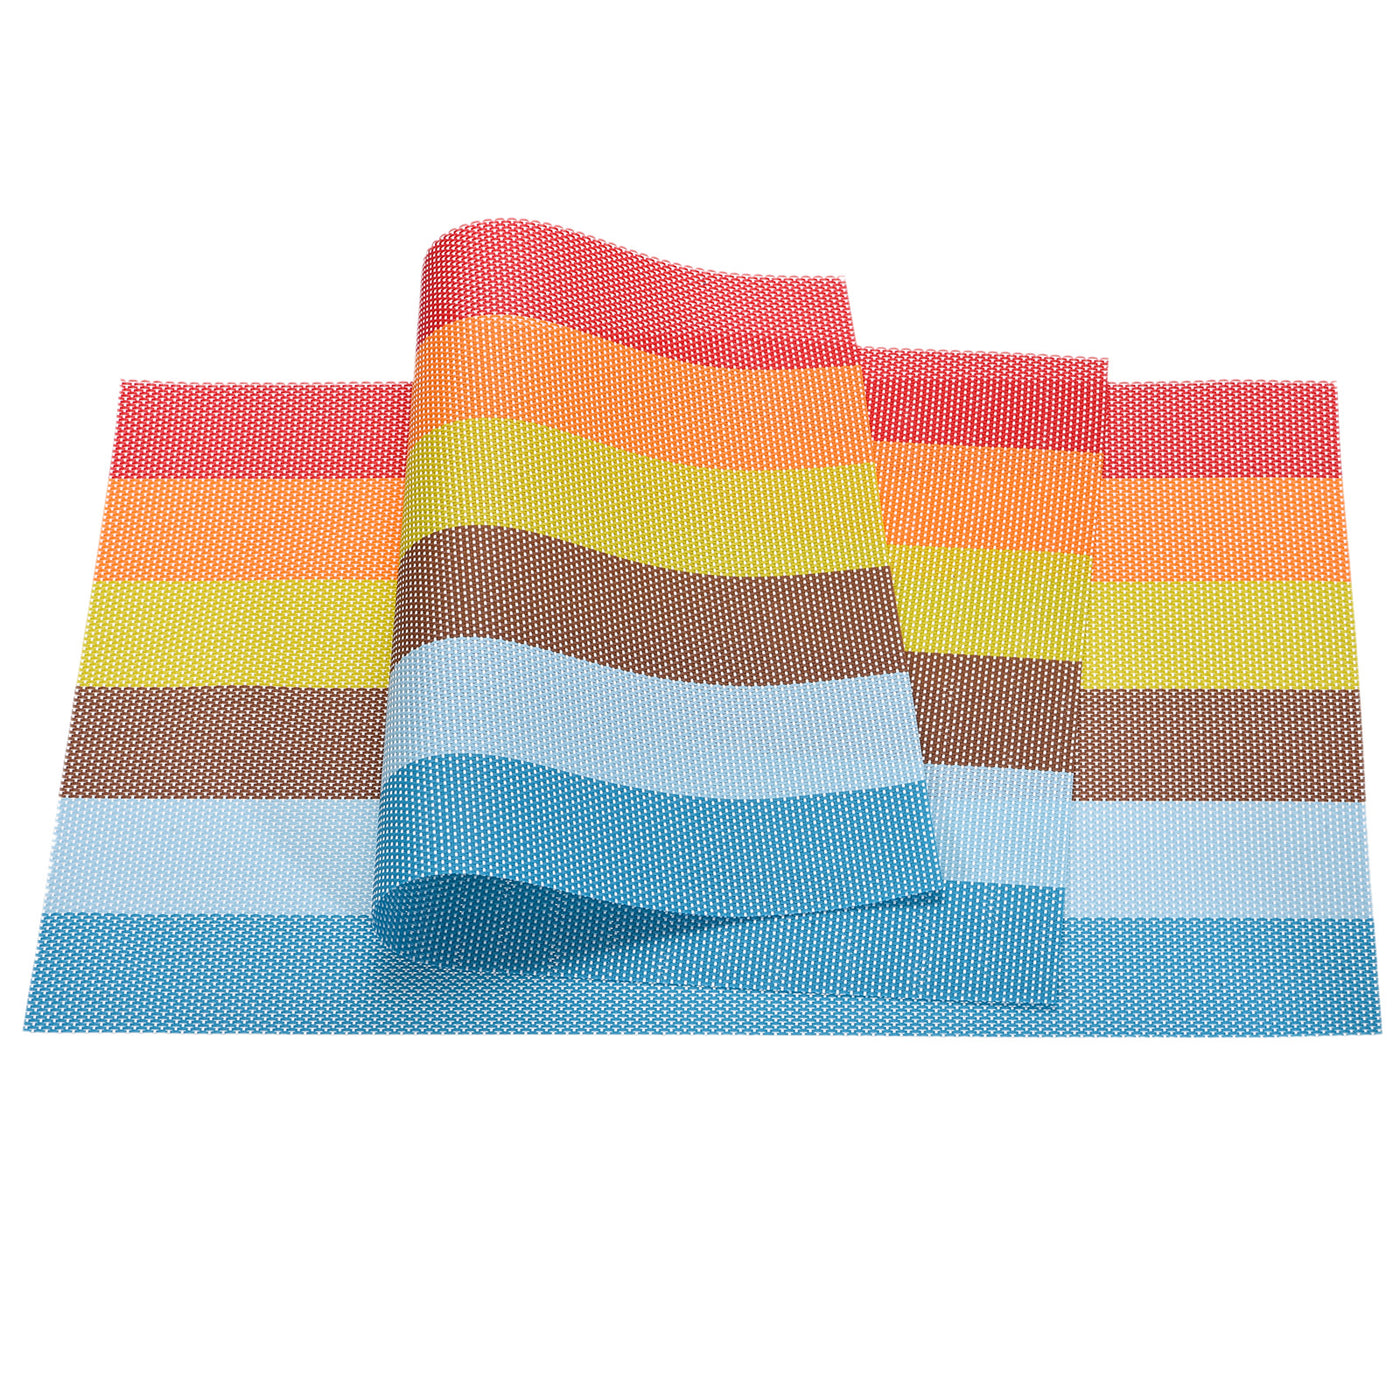 uxcell Uxcell Place Mats 450x300mm 2pcs PVC Table Washable Woven Placemat, Stripe Colorful